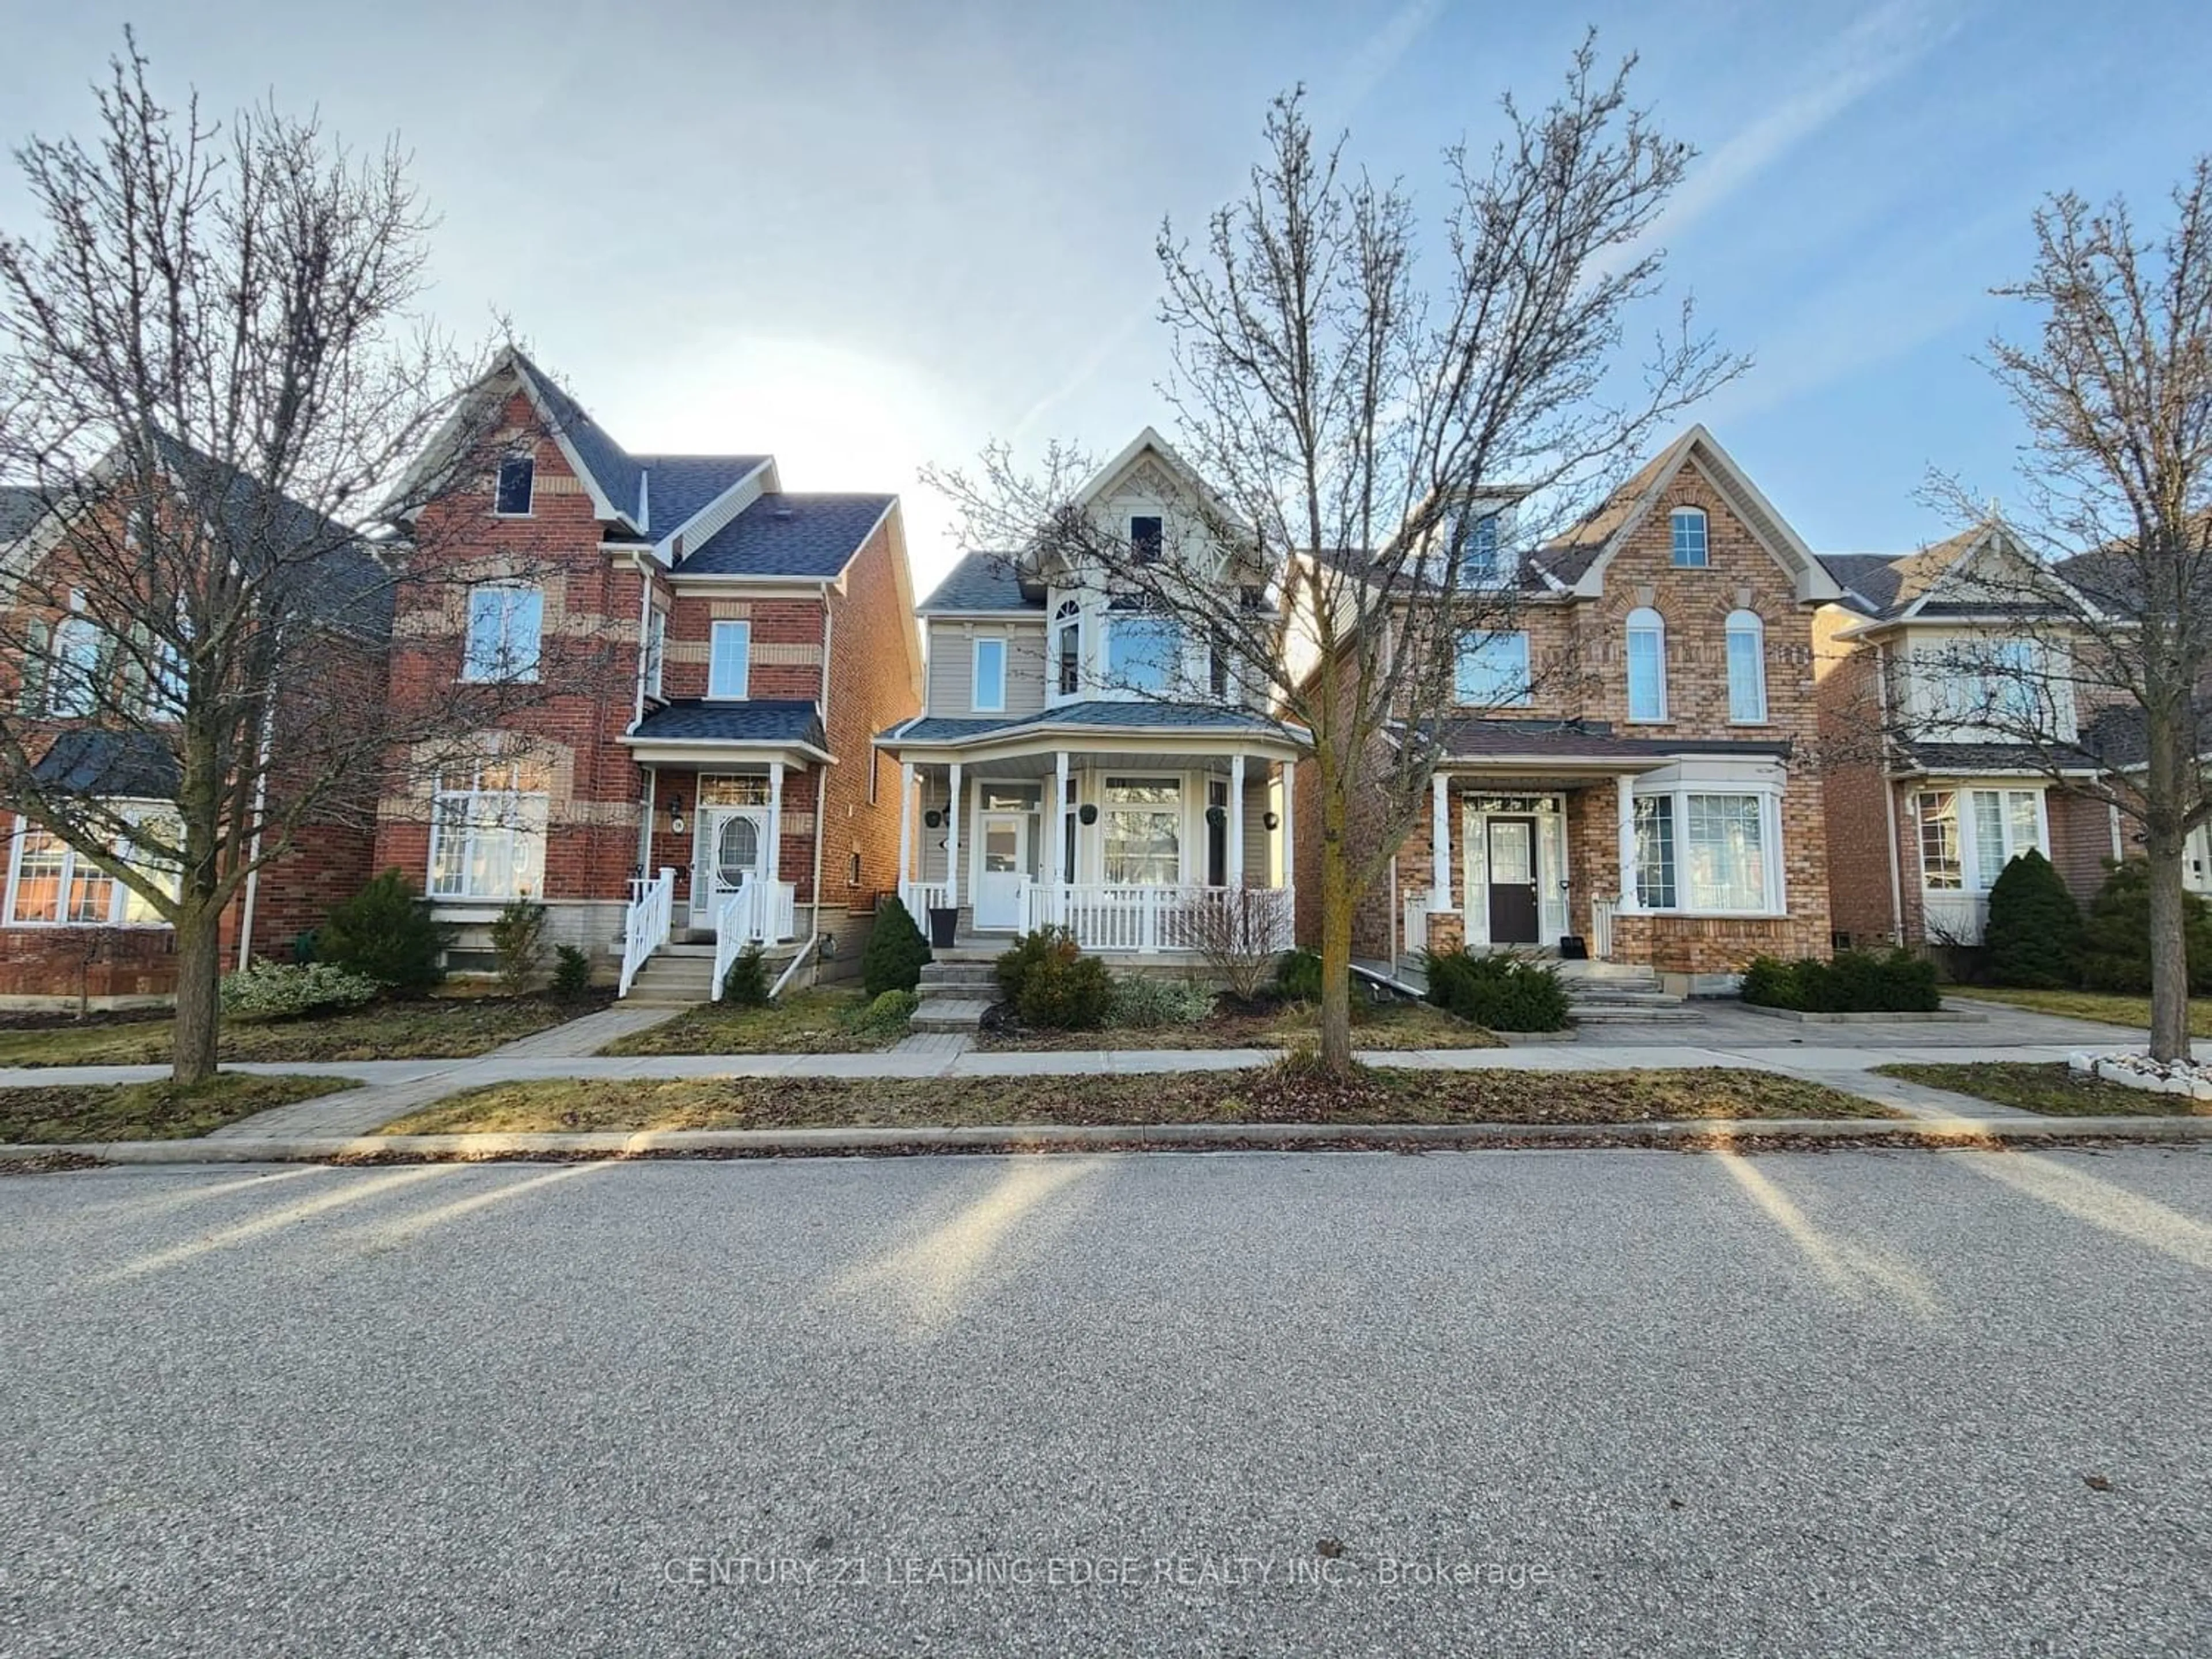 Home with brick exterior material for 26 Pingel Rd, Markham Ontario L6B 1B7